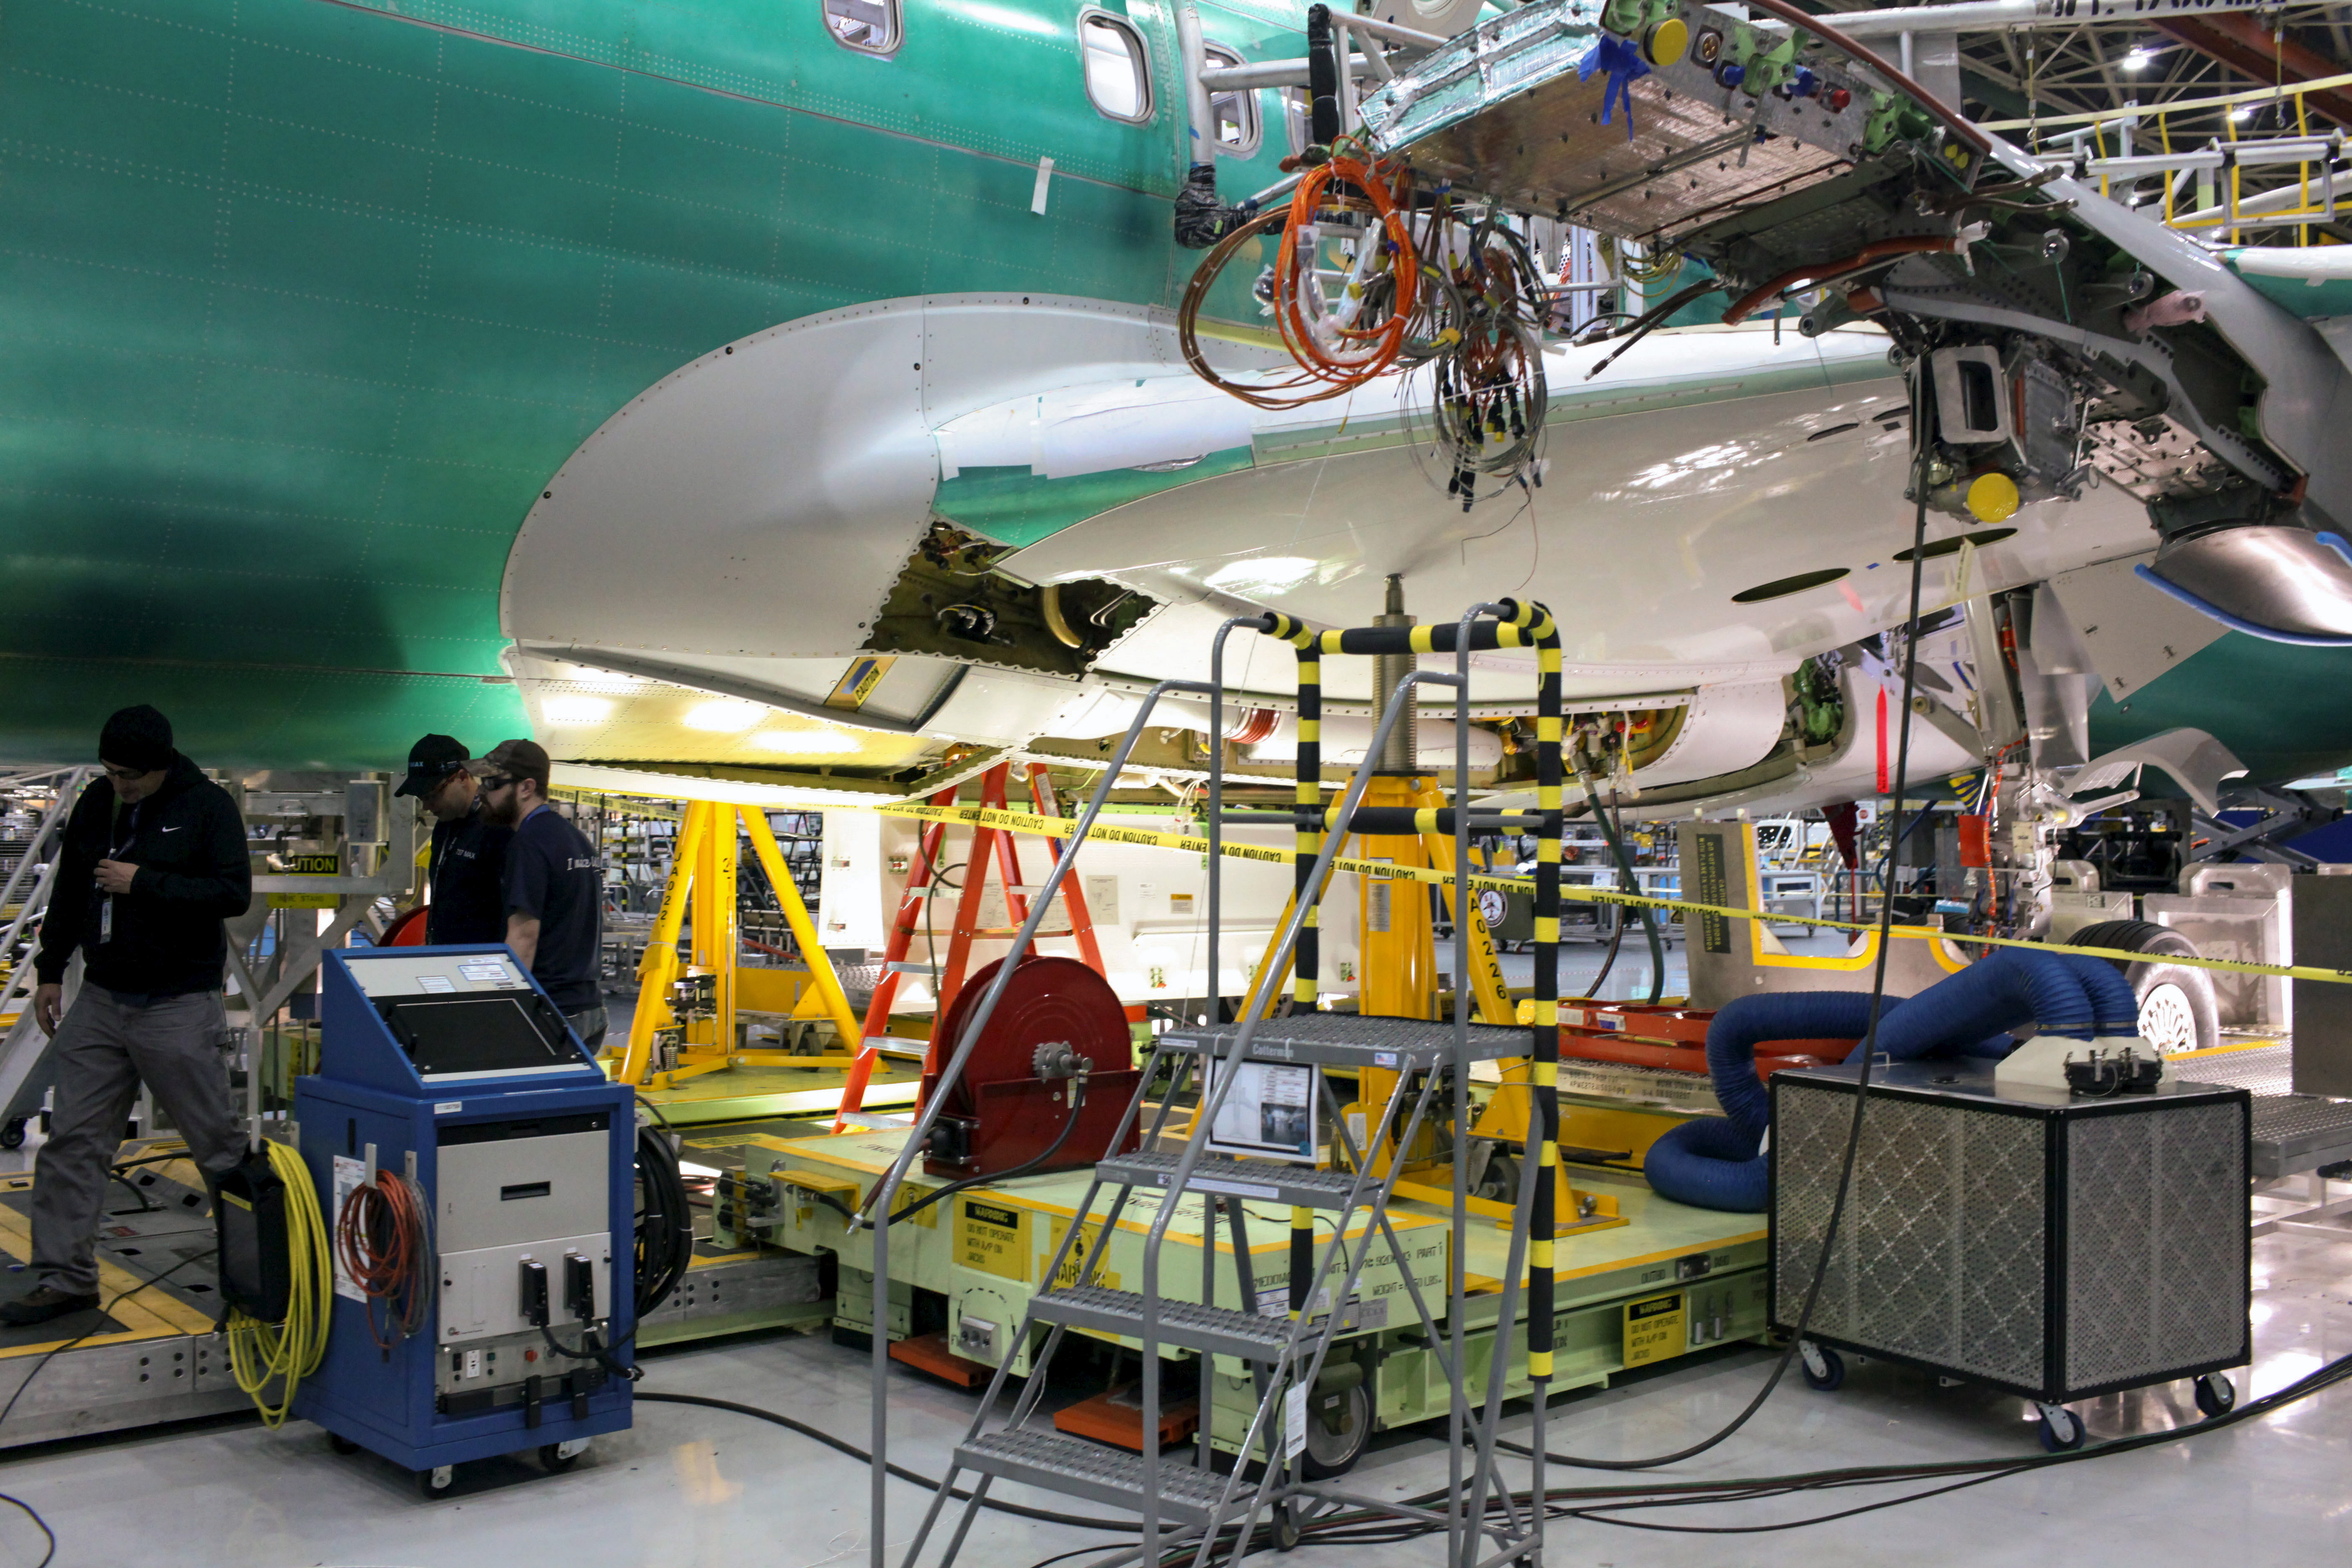 Boeing employees work during a media tour of the Boeing 737 MAX at the Boeing plant in Renton, Washington